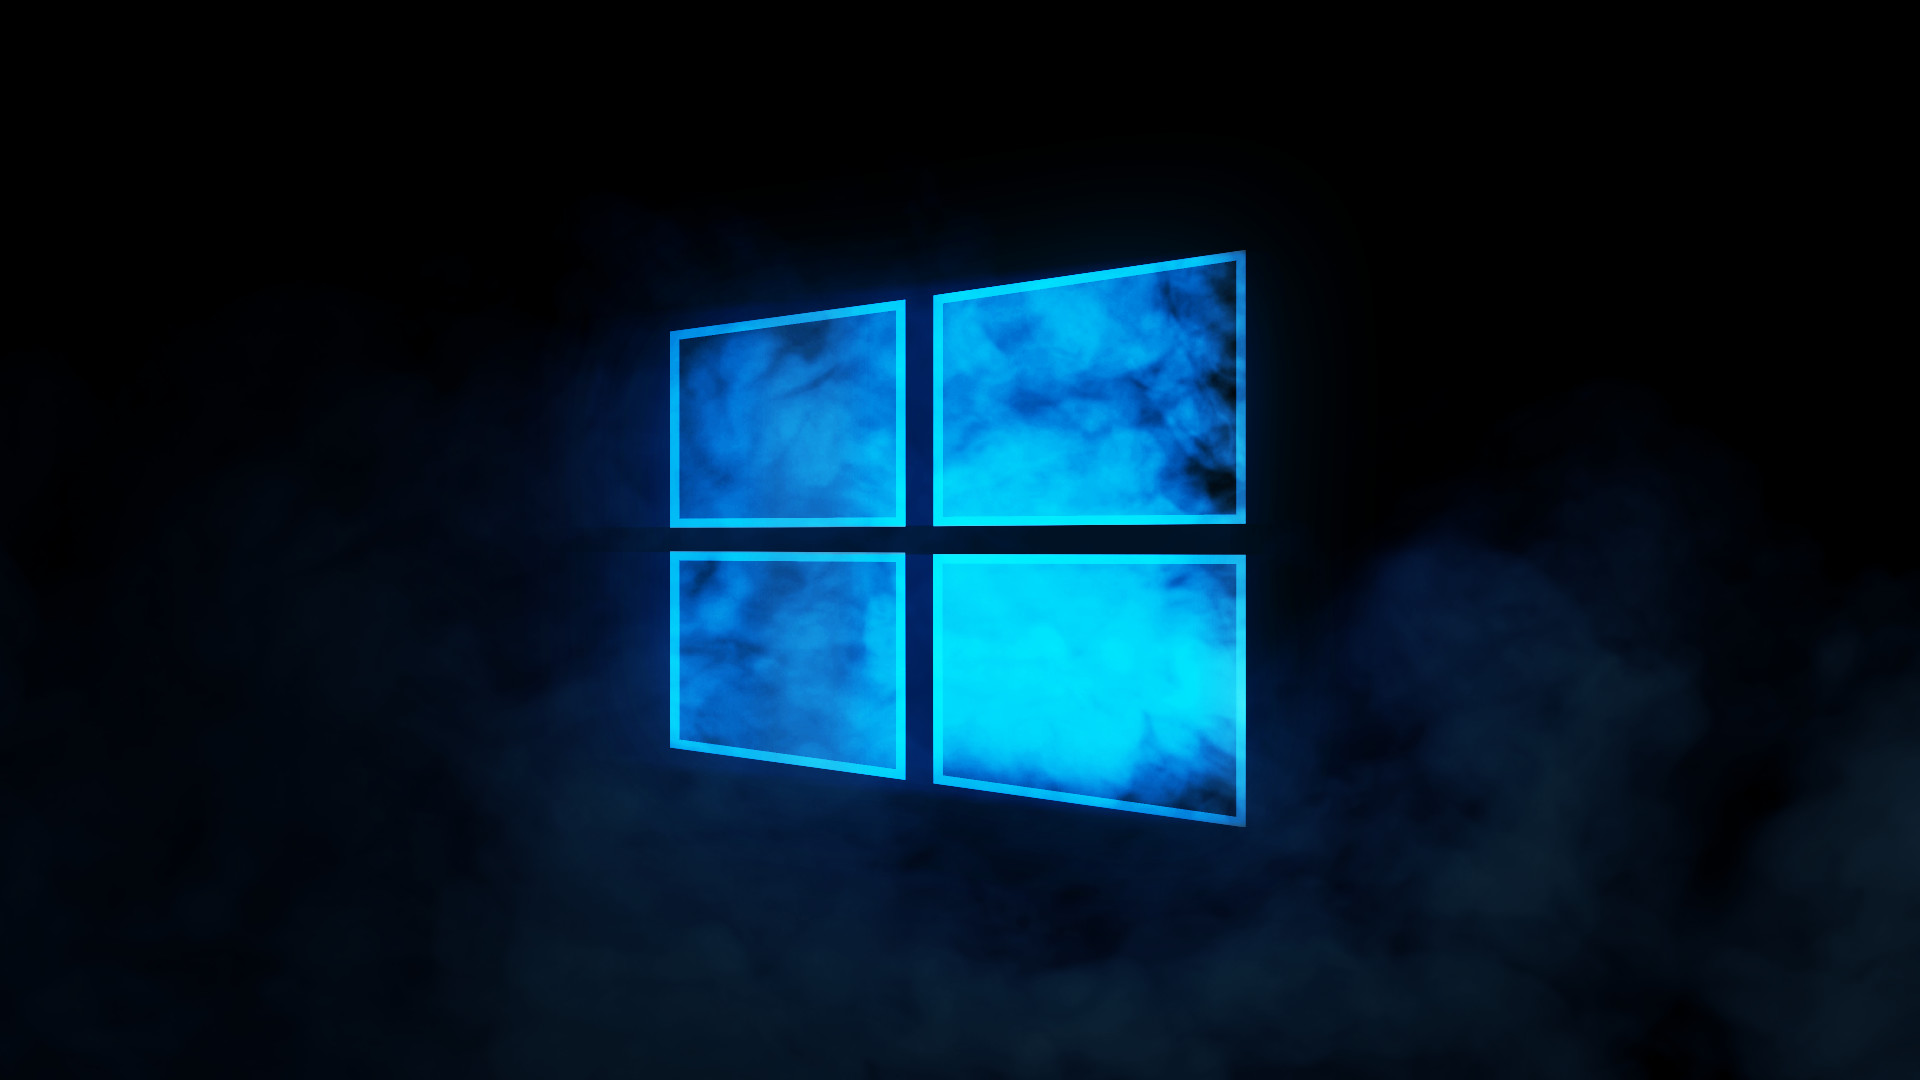 1920x1080 This should download to your PC for you to use on your desktop. Enjoy! Windows  10 Wallpaper